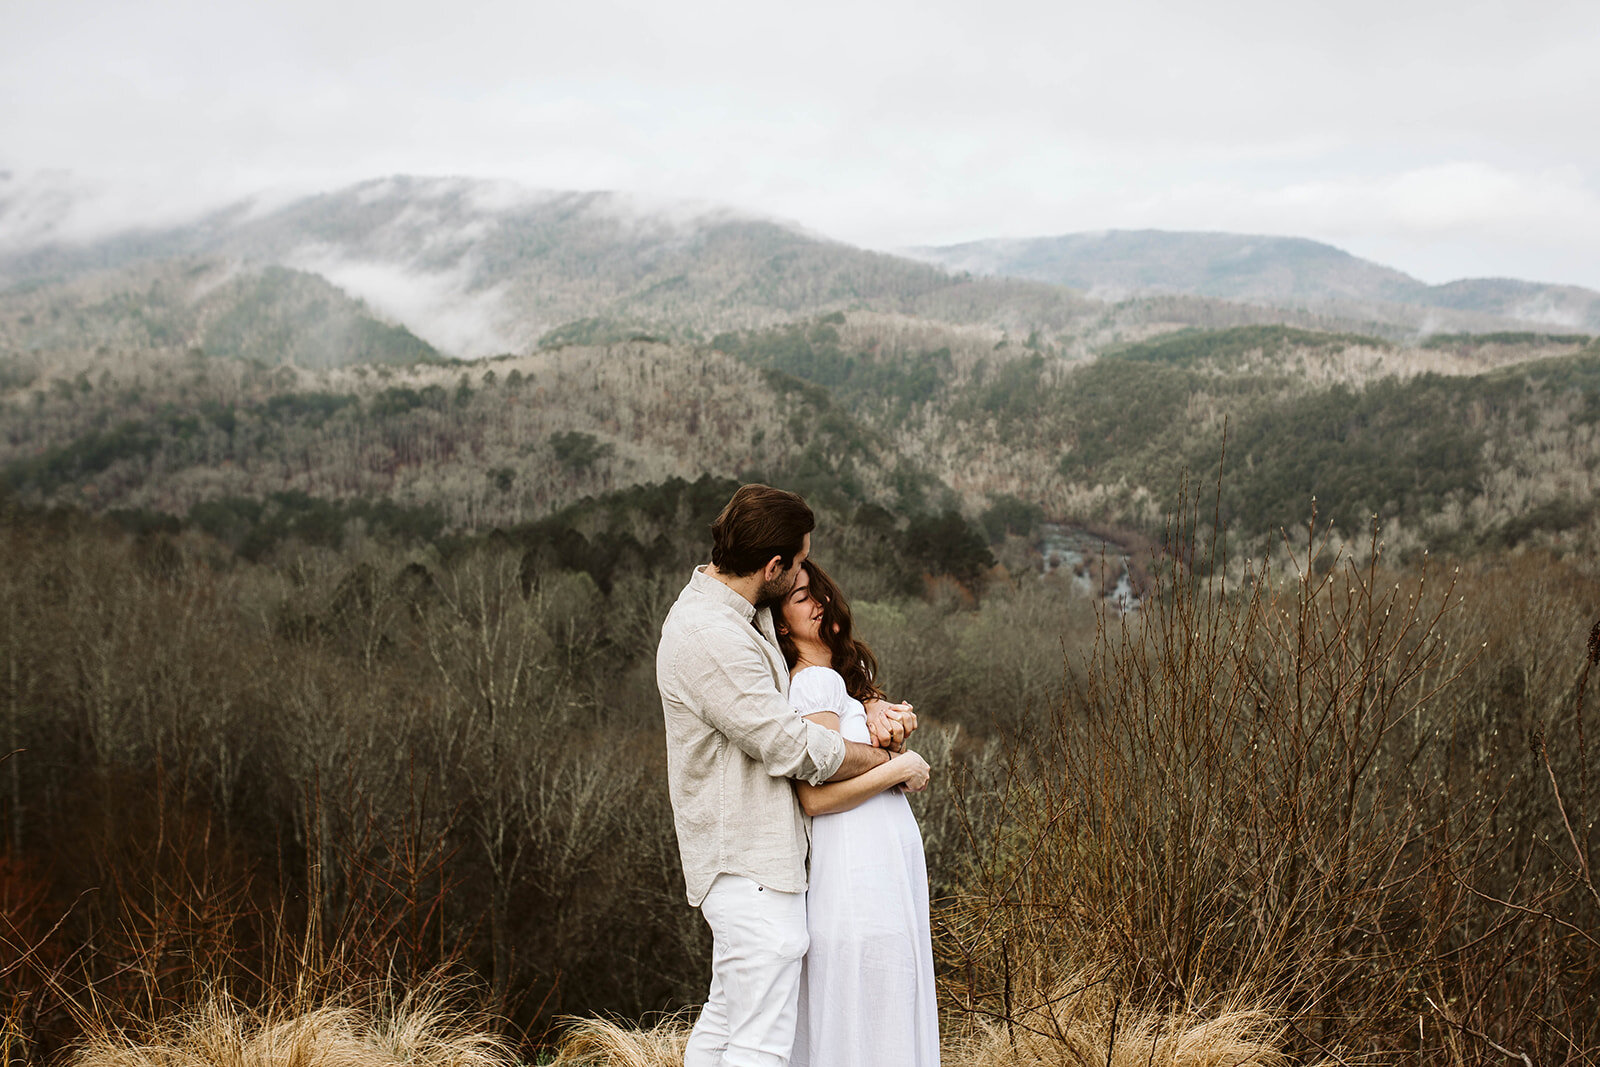 adventure-engagement-in-the-great-smoky-mountains-chattanooga-elopement-photographer5Y6A5121_websize.jpg